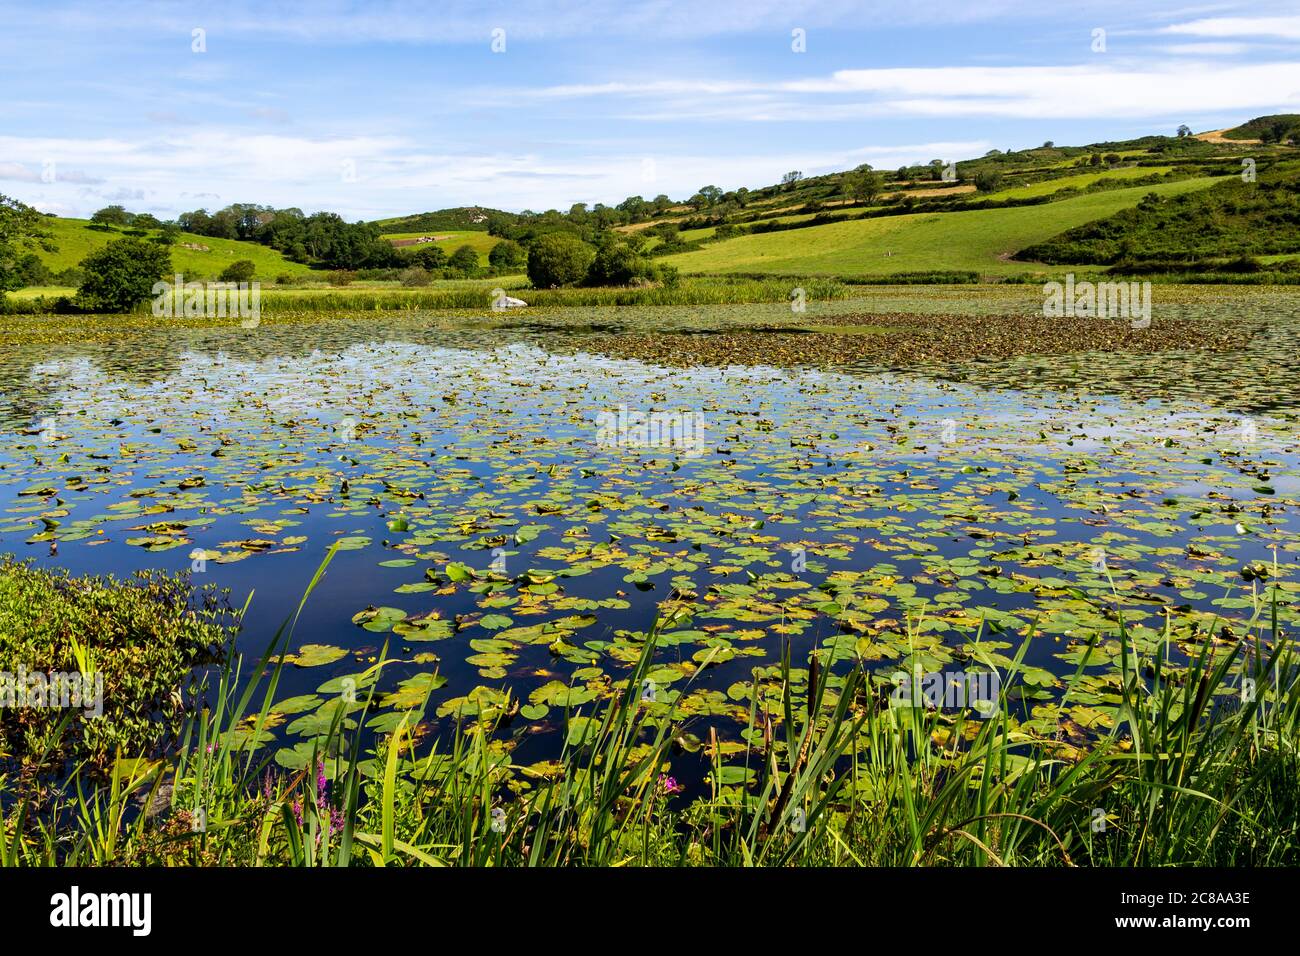 Lake or Pond covered in Lily pads rural Ireland Stock Photo